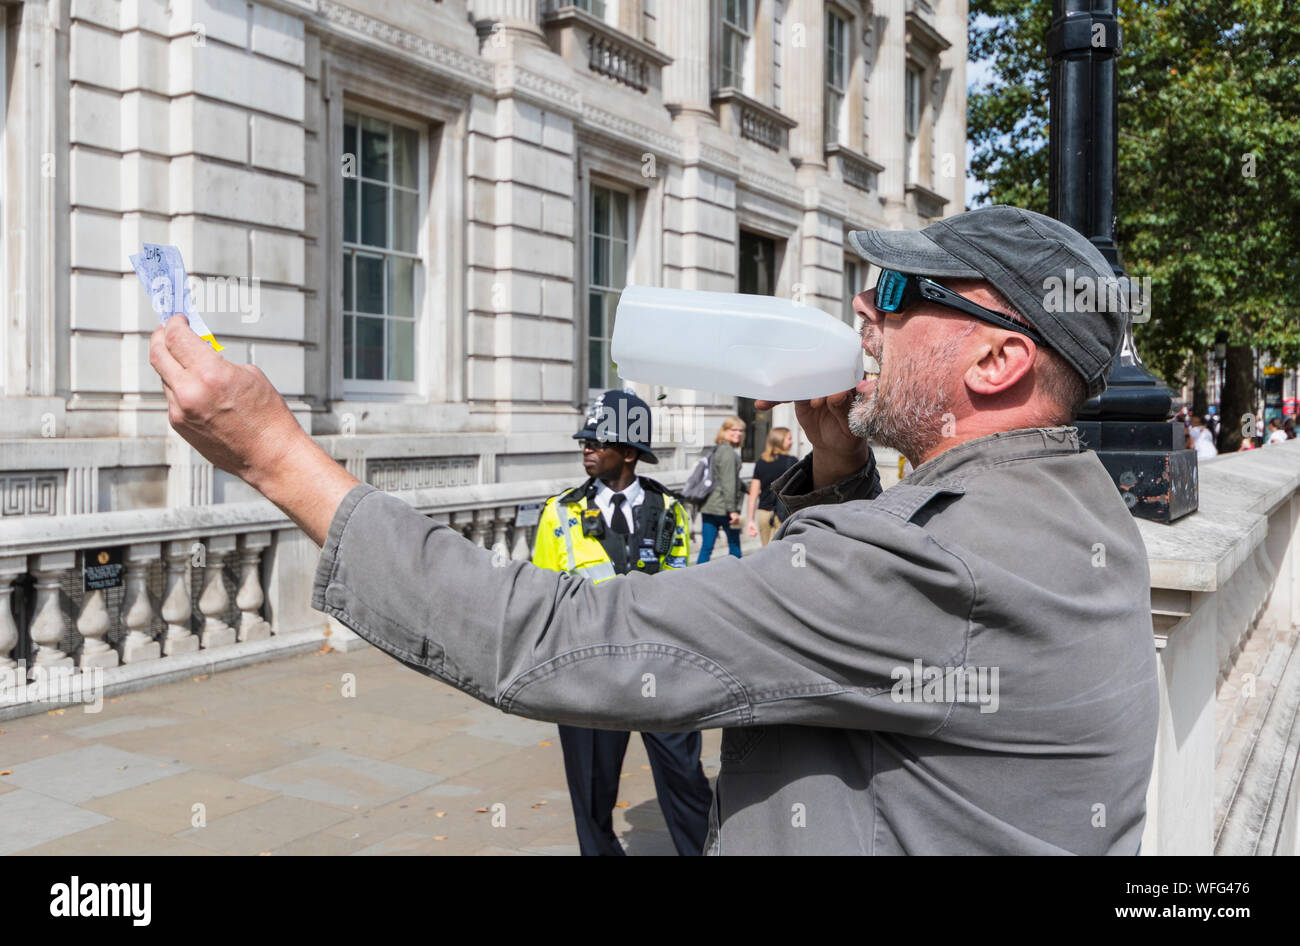 Lone protester outside Cabinet Office at Whitehall in London shouting through home-made megaphone to PM, with police watching. Free speech UK. Stock Photo